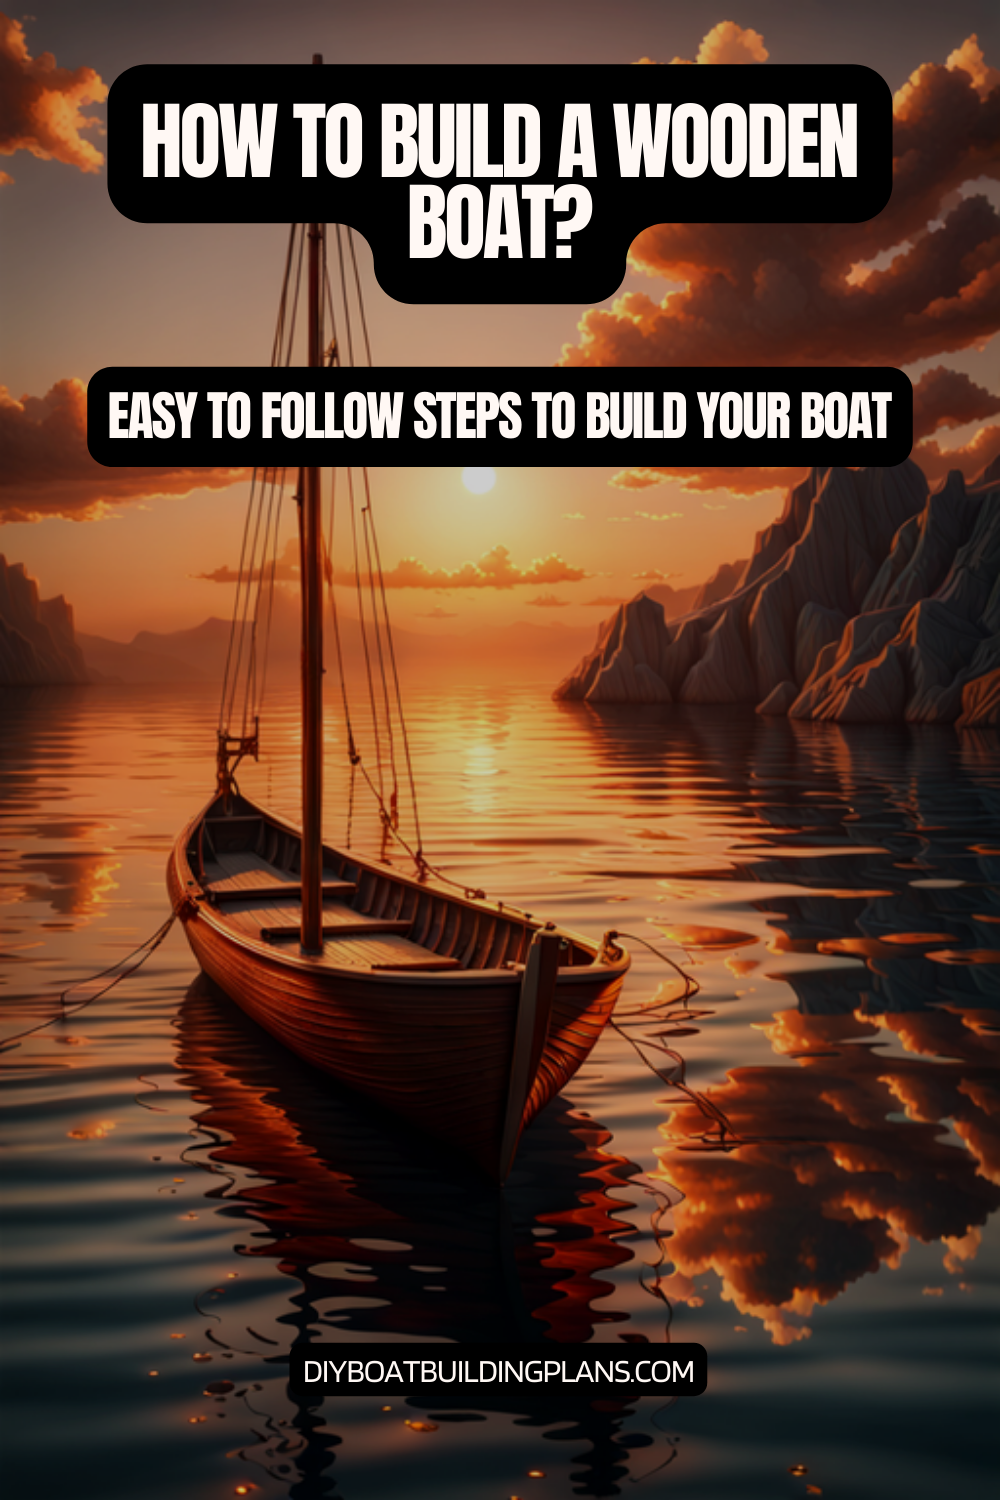 How To Build a Wooden Boat